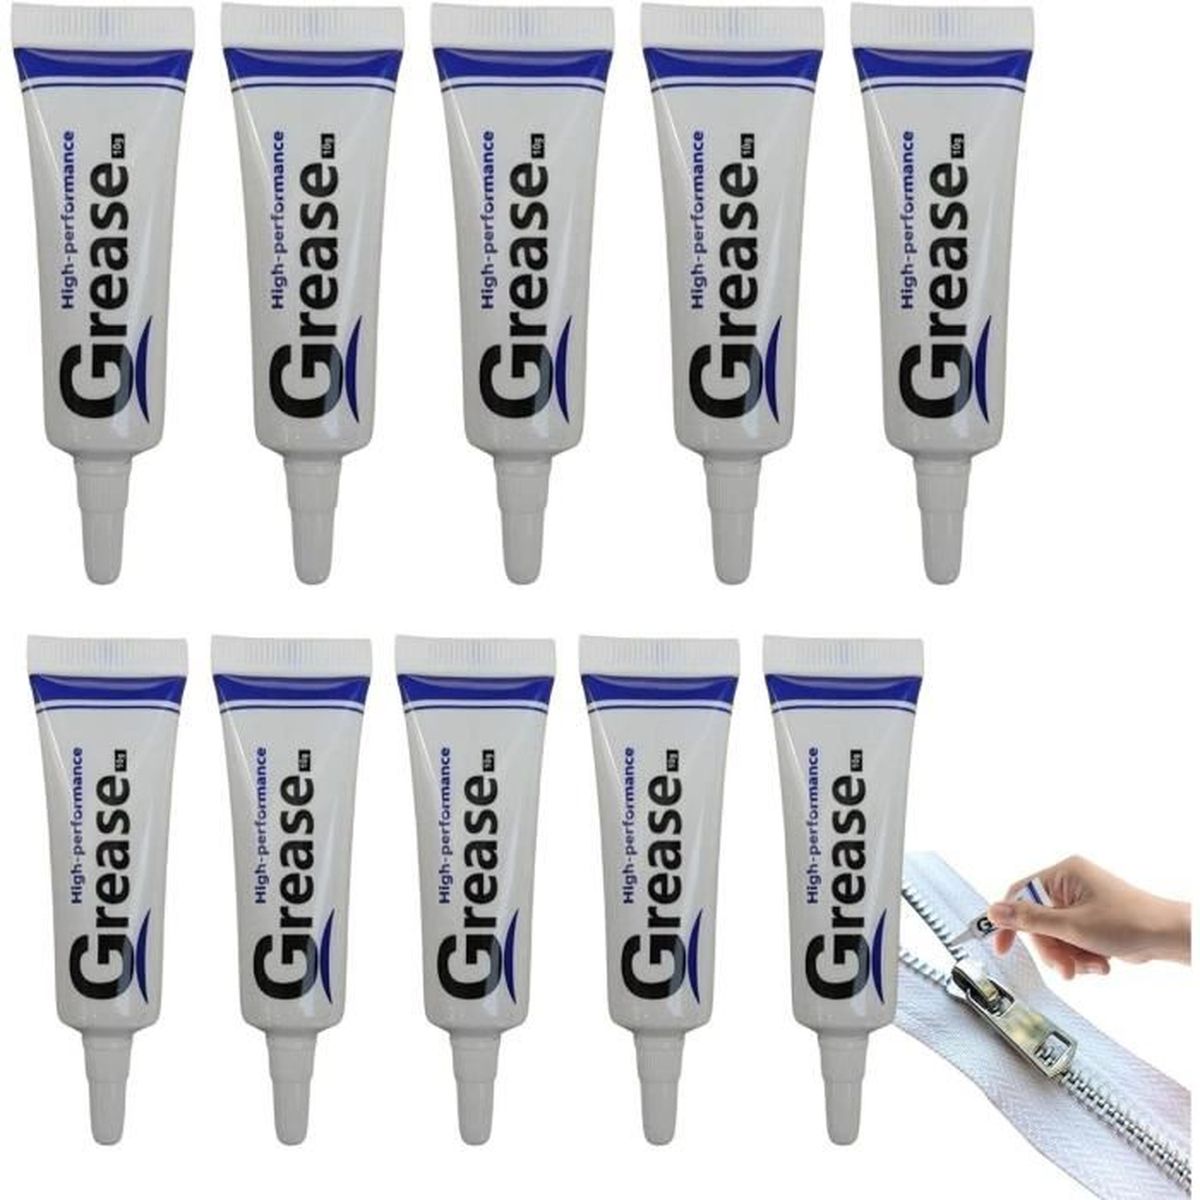 Graisse silicone joint - Cdiscount